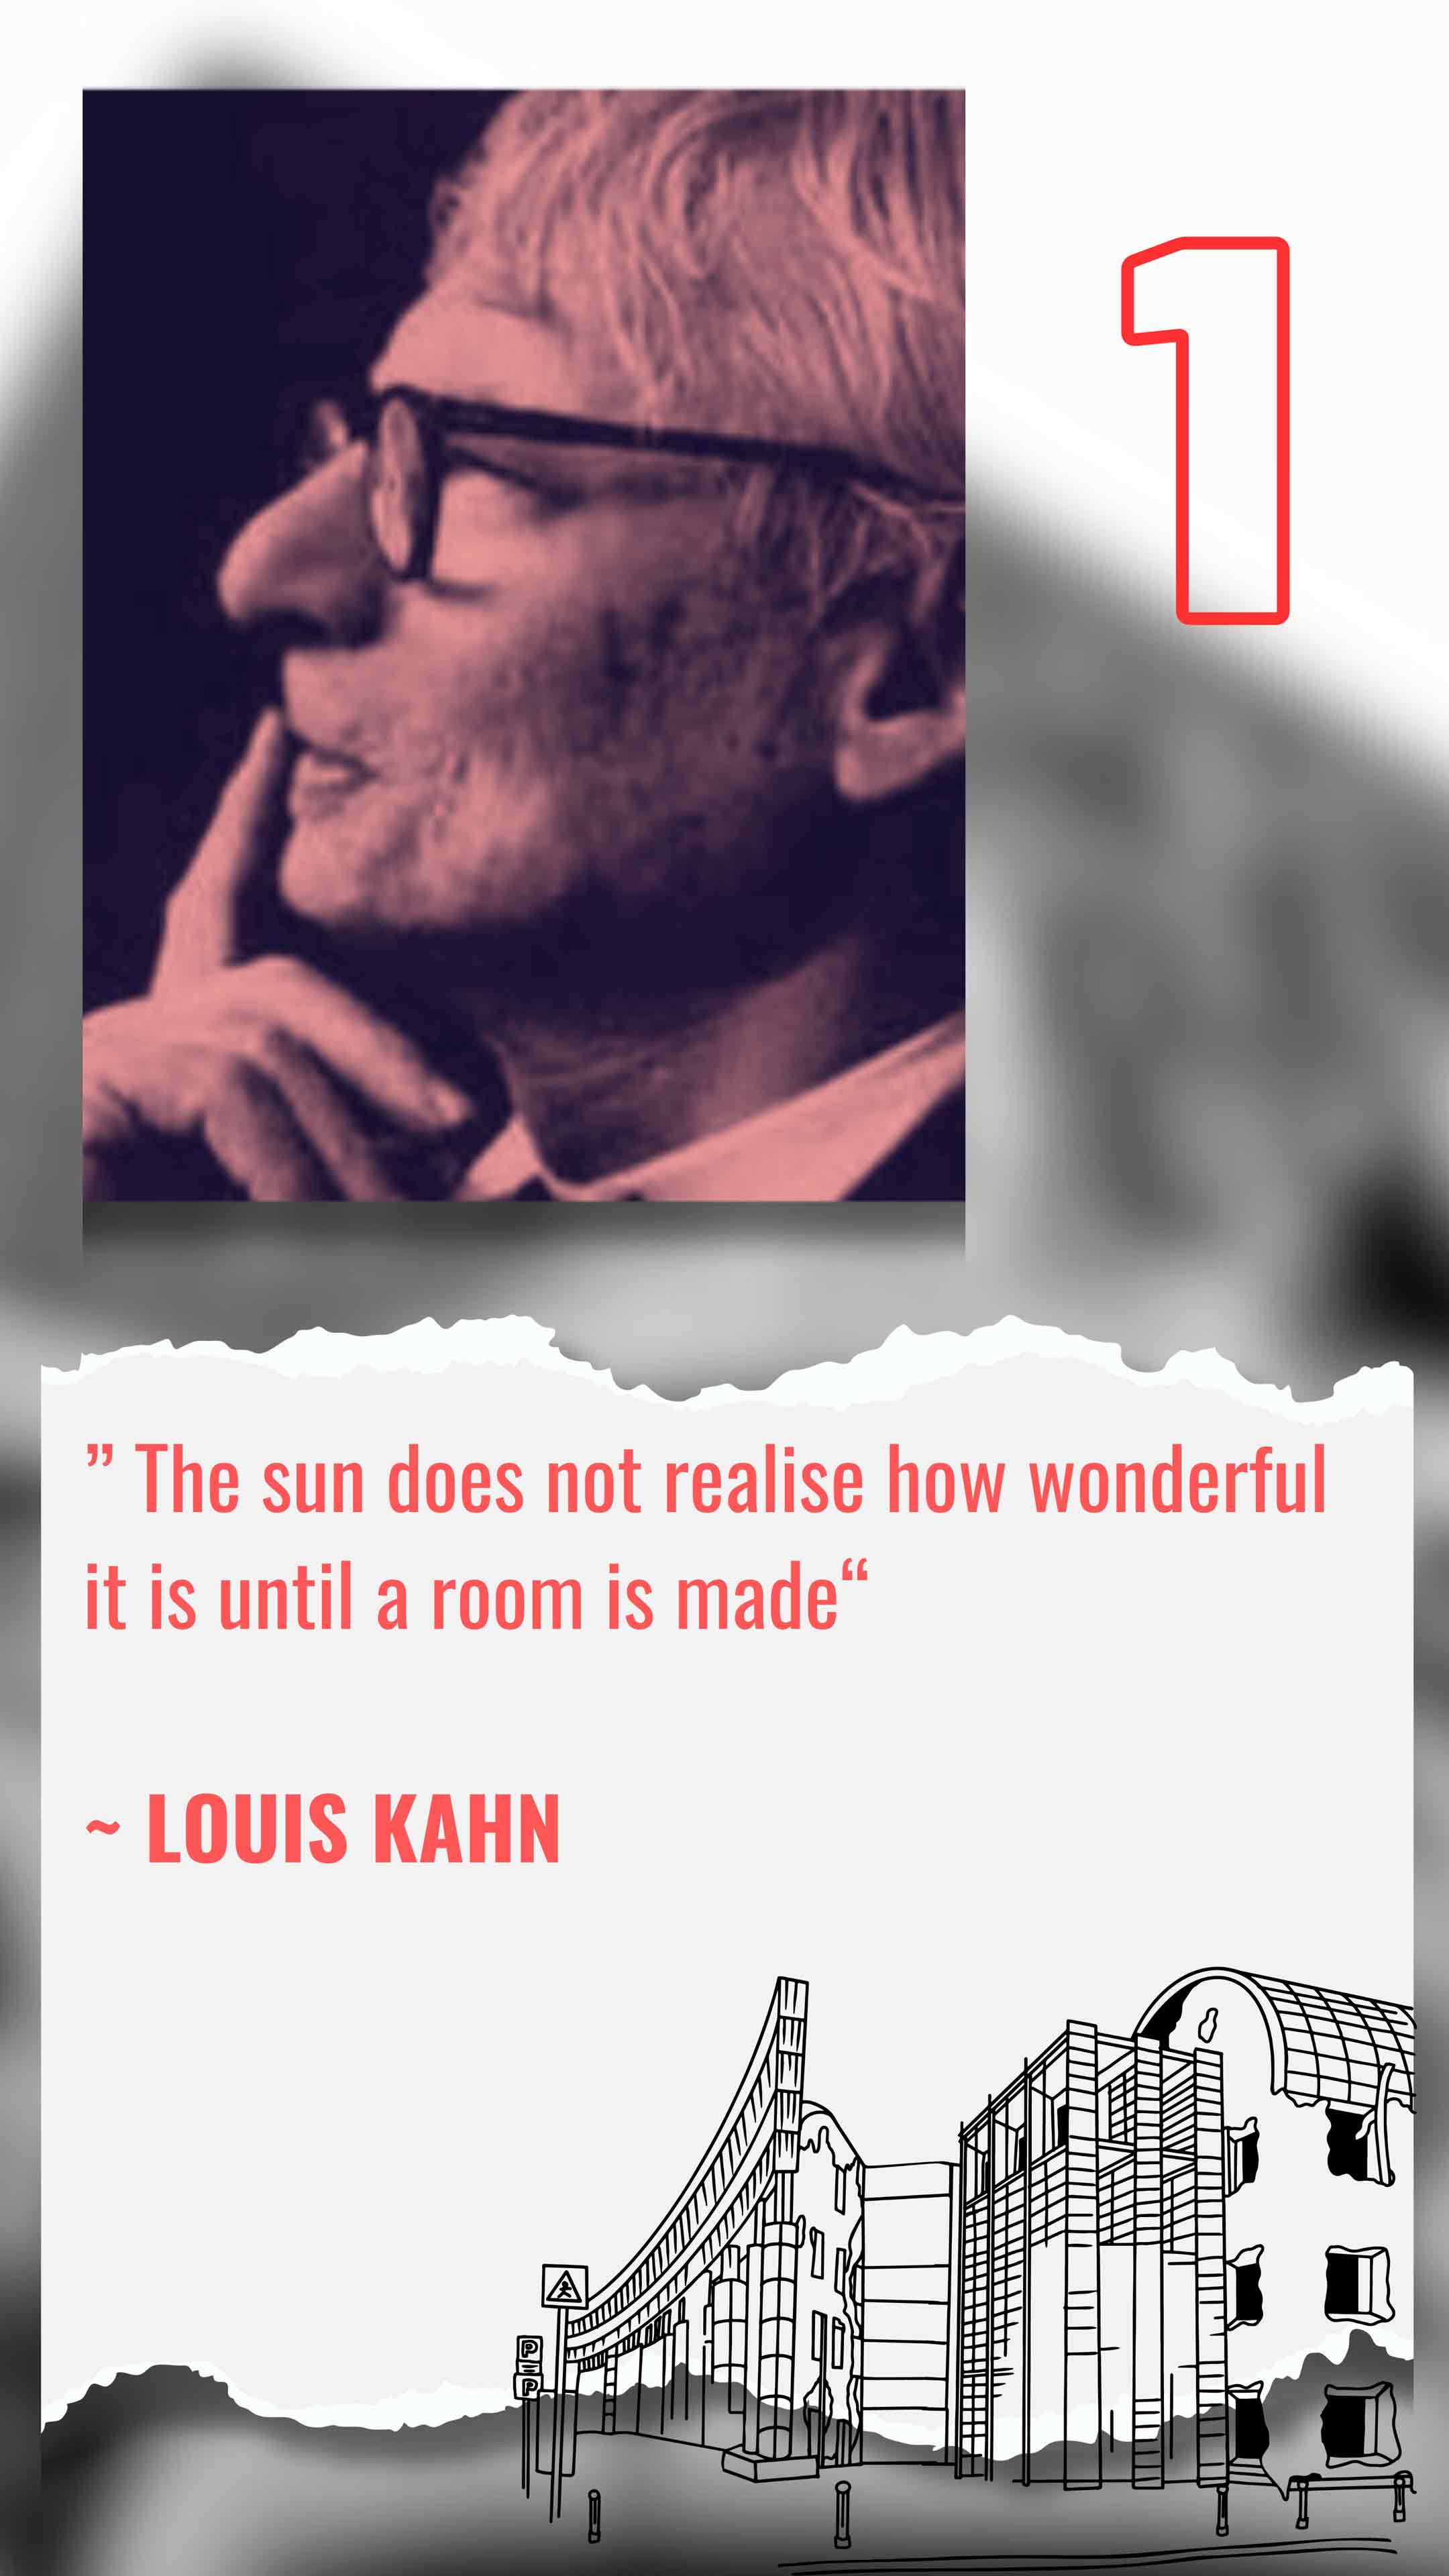 Remembering Famous Quotes by Great Architects… - 2